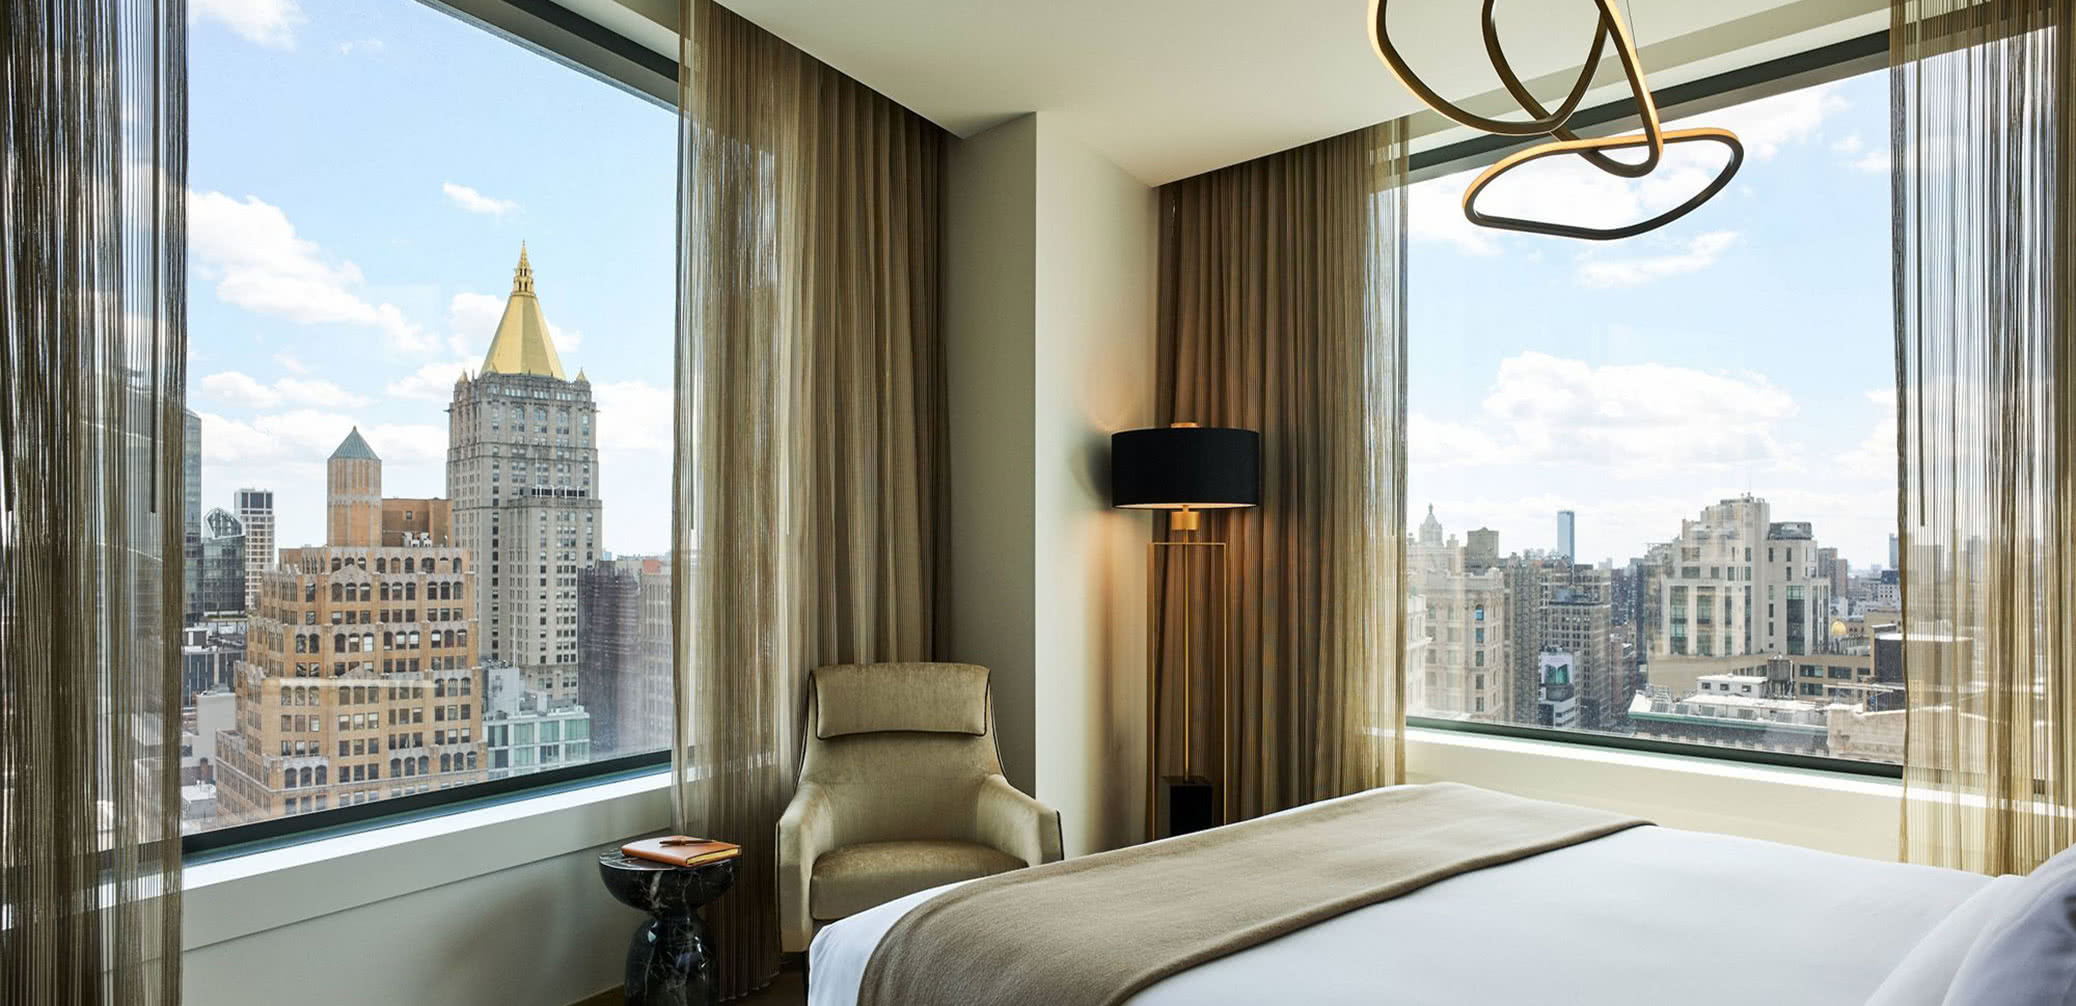 ritz-carlton-new-york-nomad-vs-central-park-which-is-best